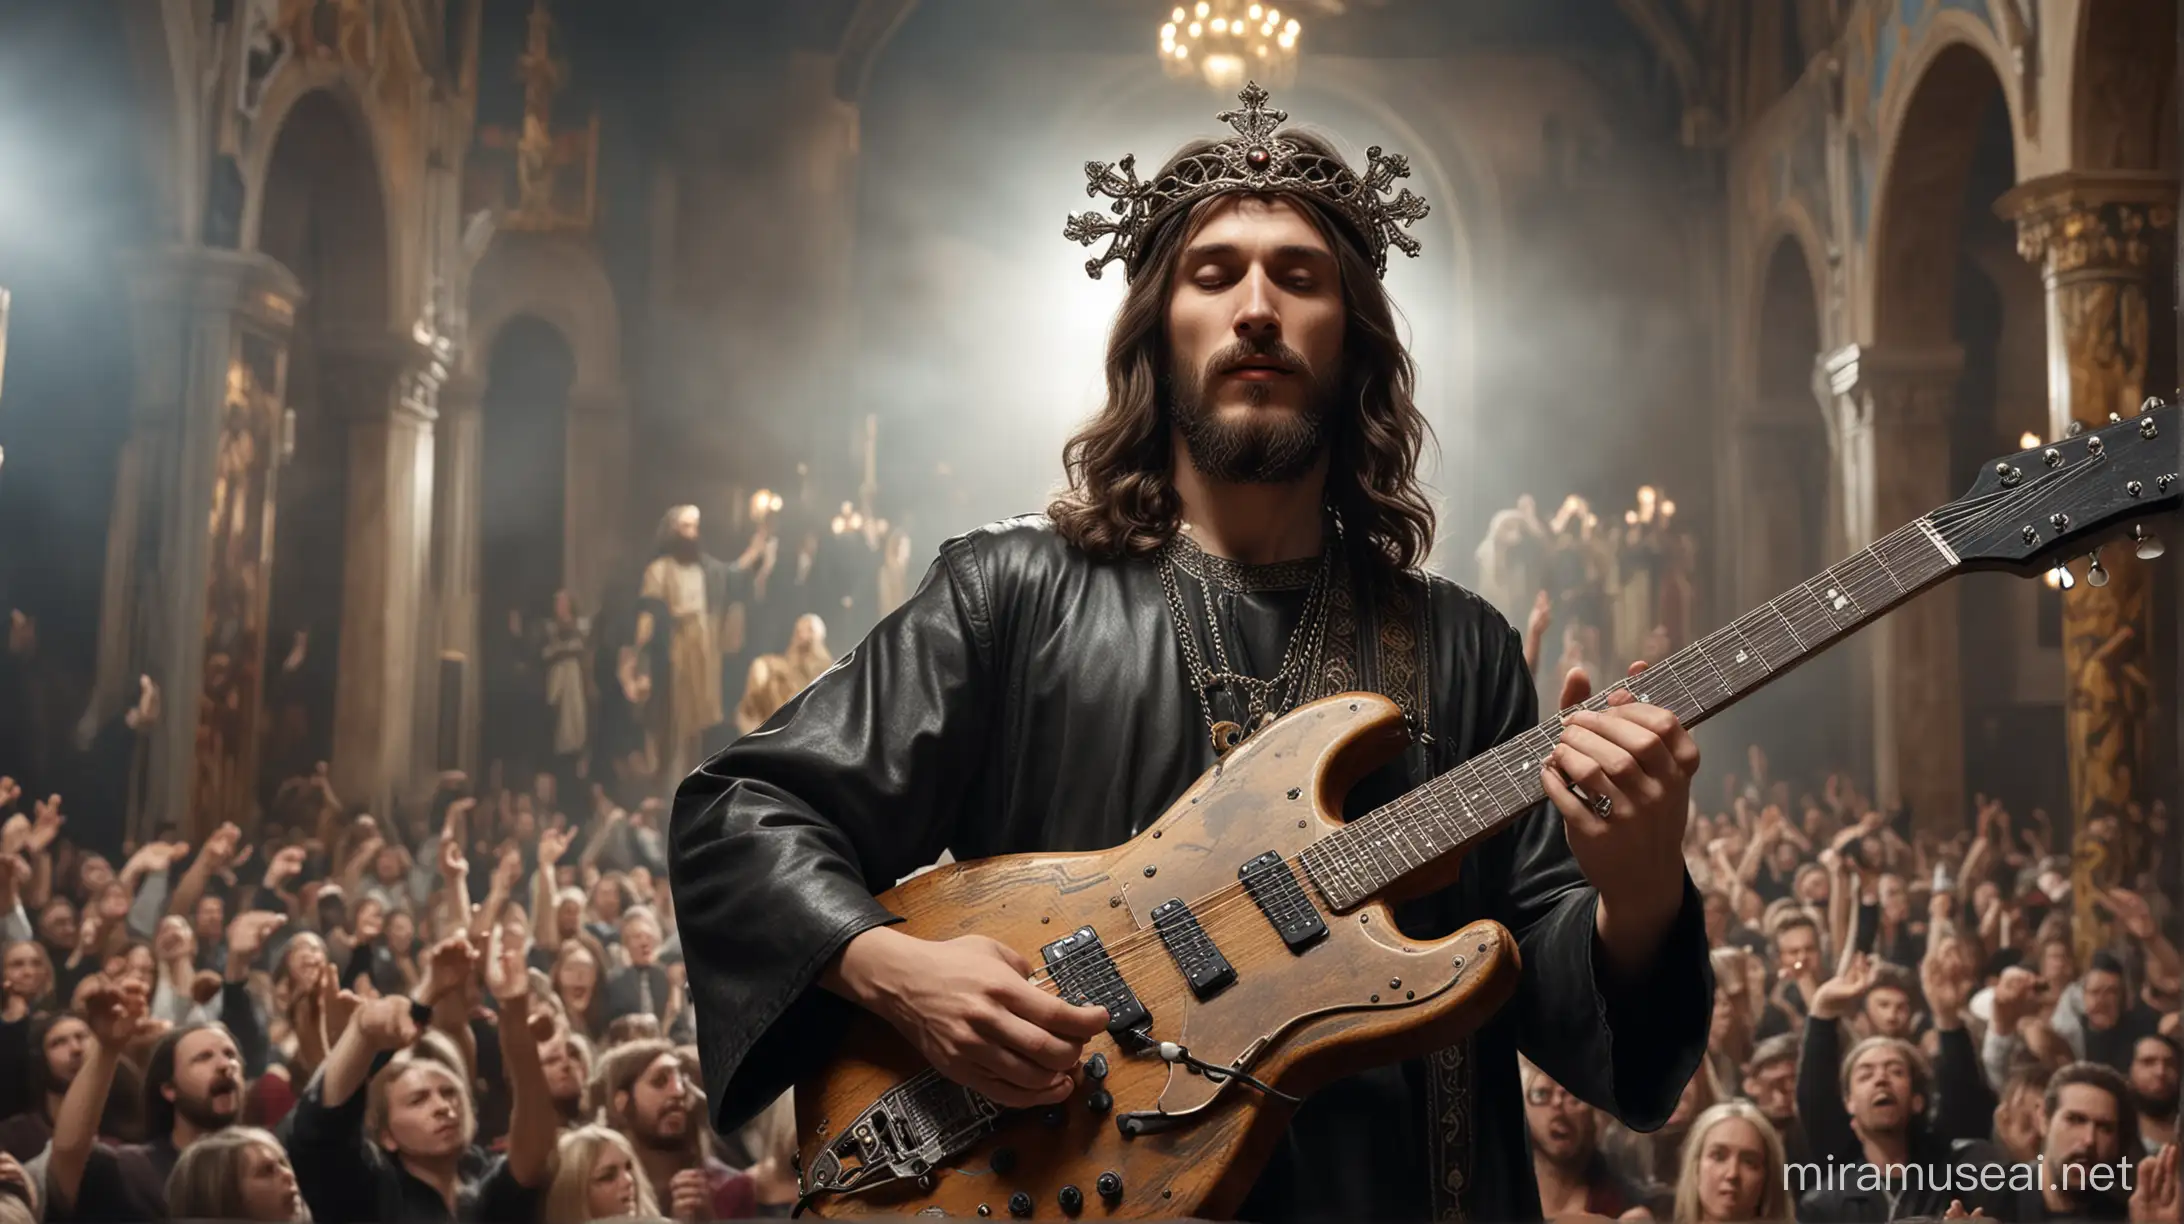 Electric Rock Guitar Performance by Jesus Christ in Russian Orthodox Church